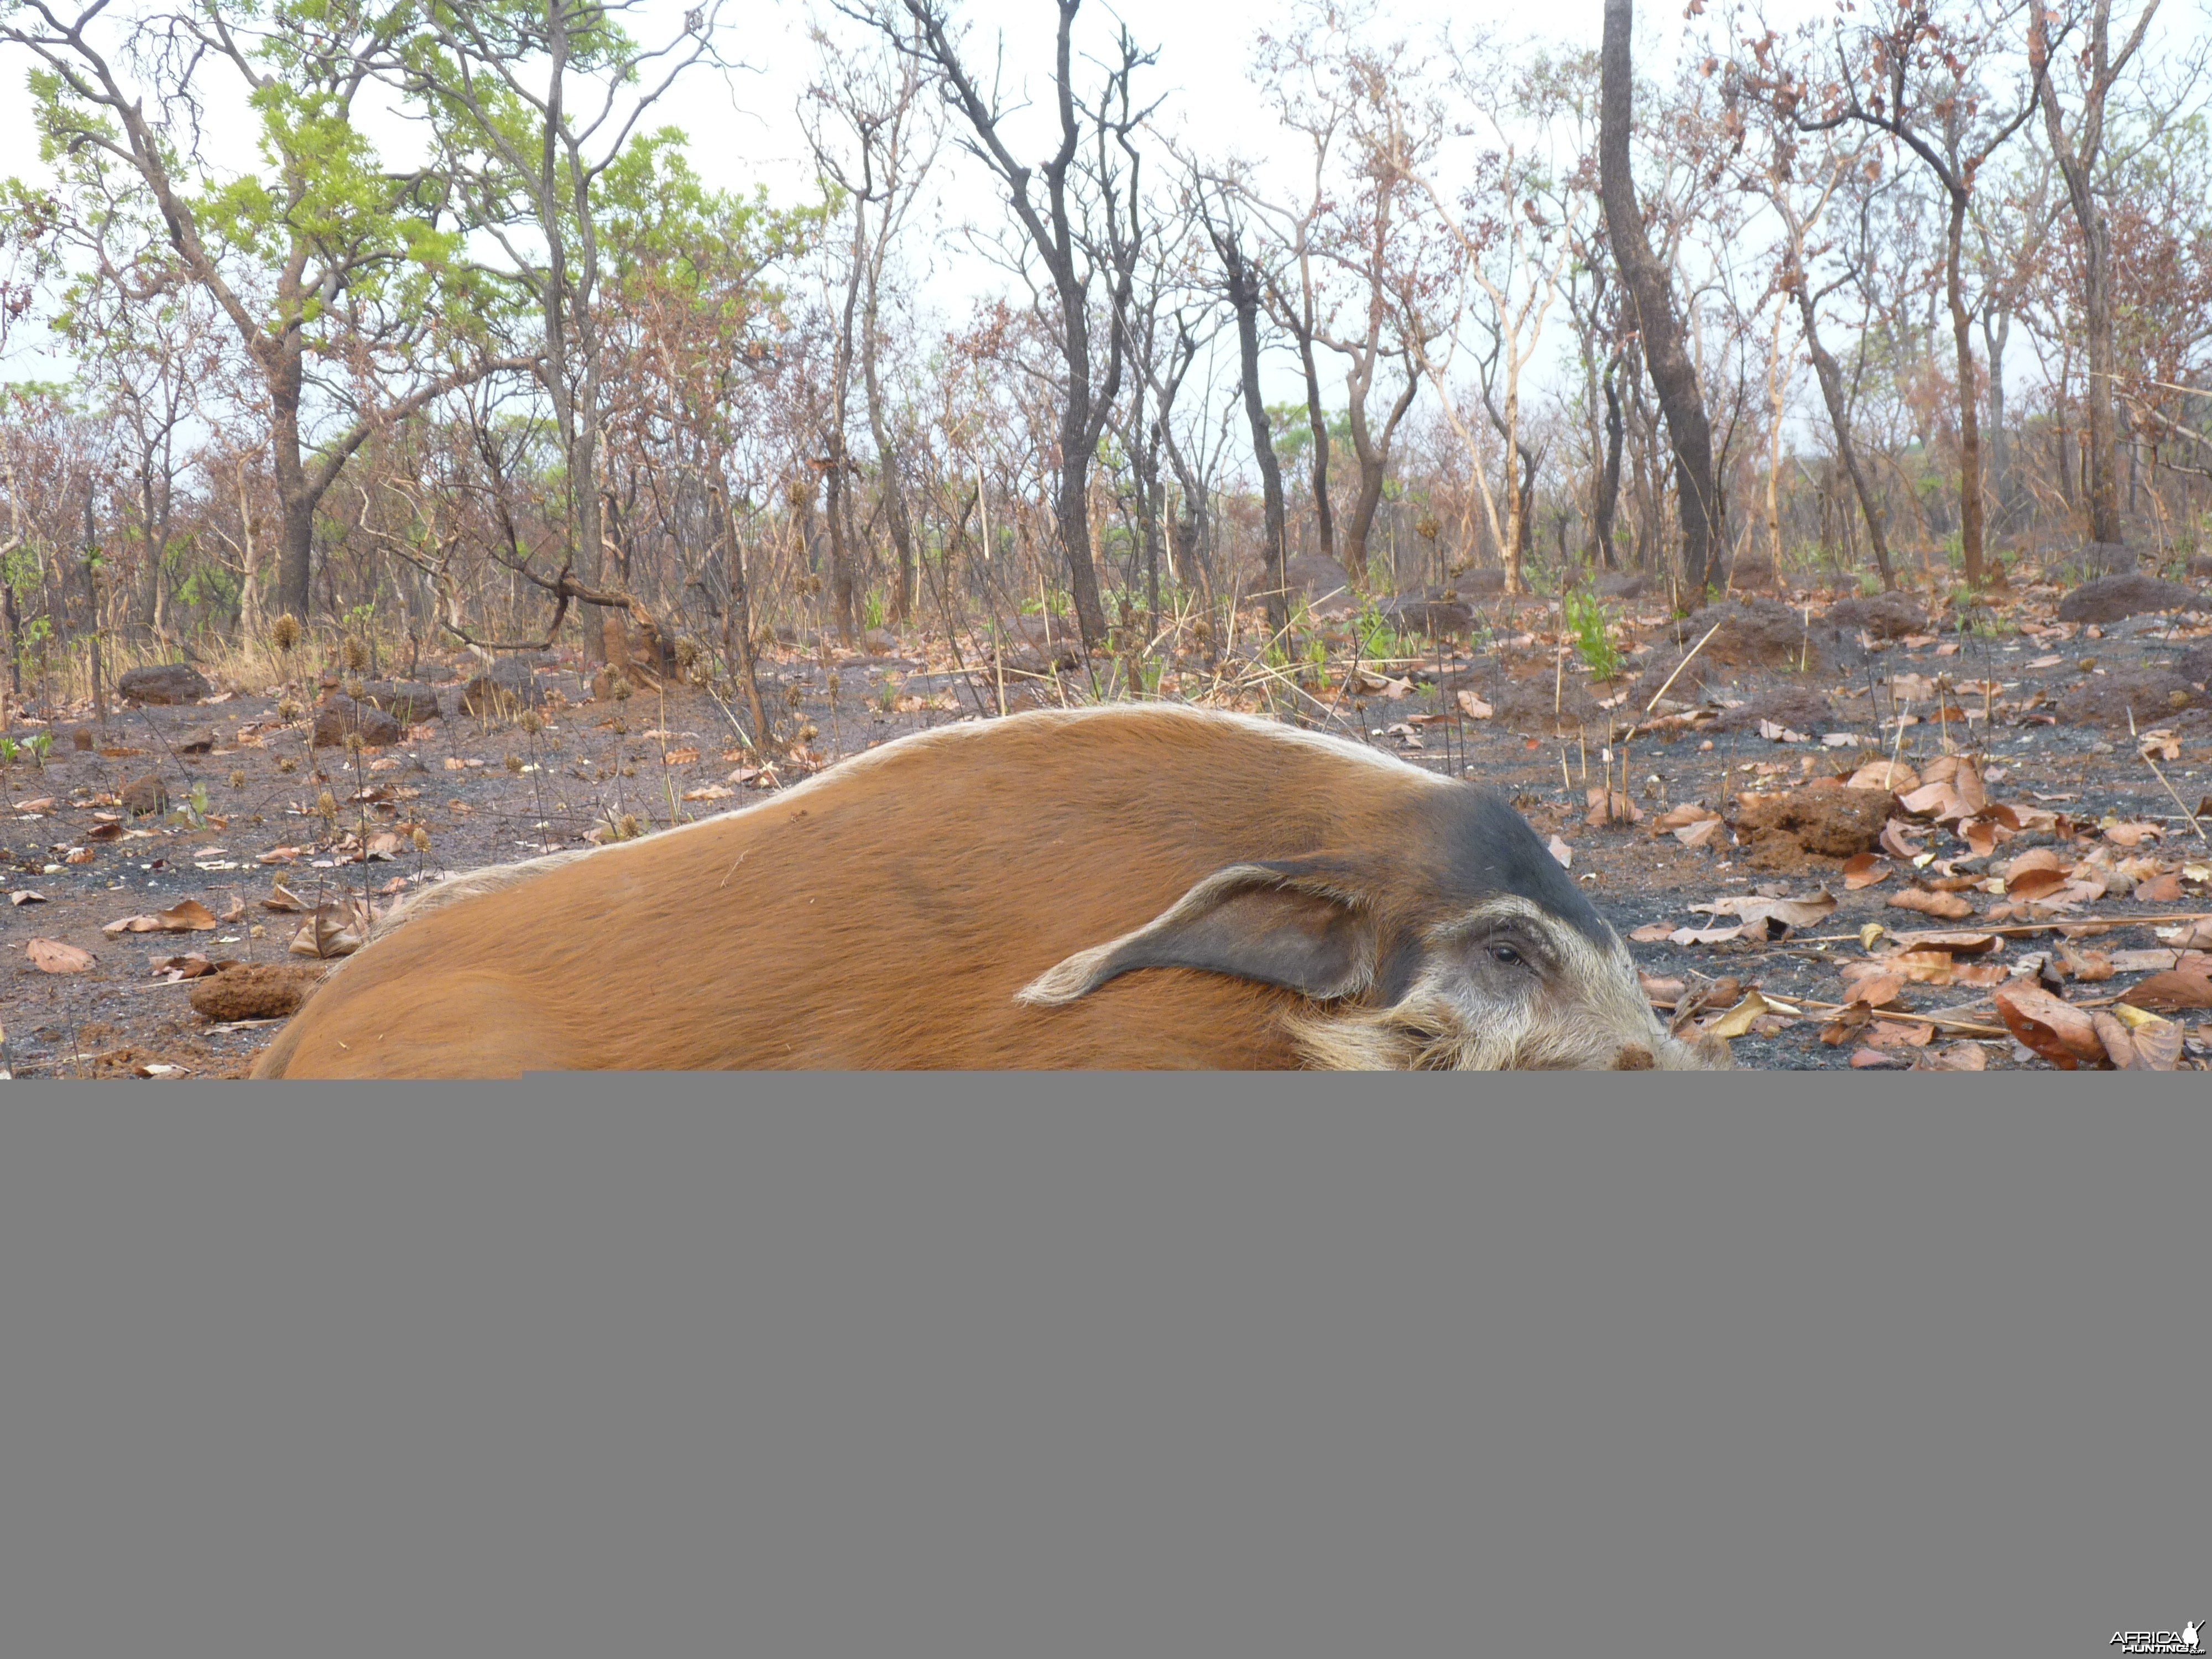 Hunting Red River Hog in Central African Republic